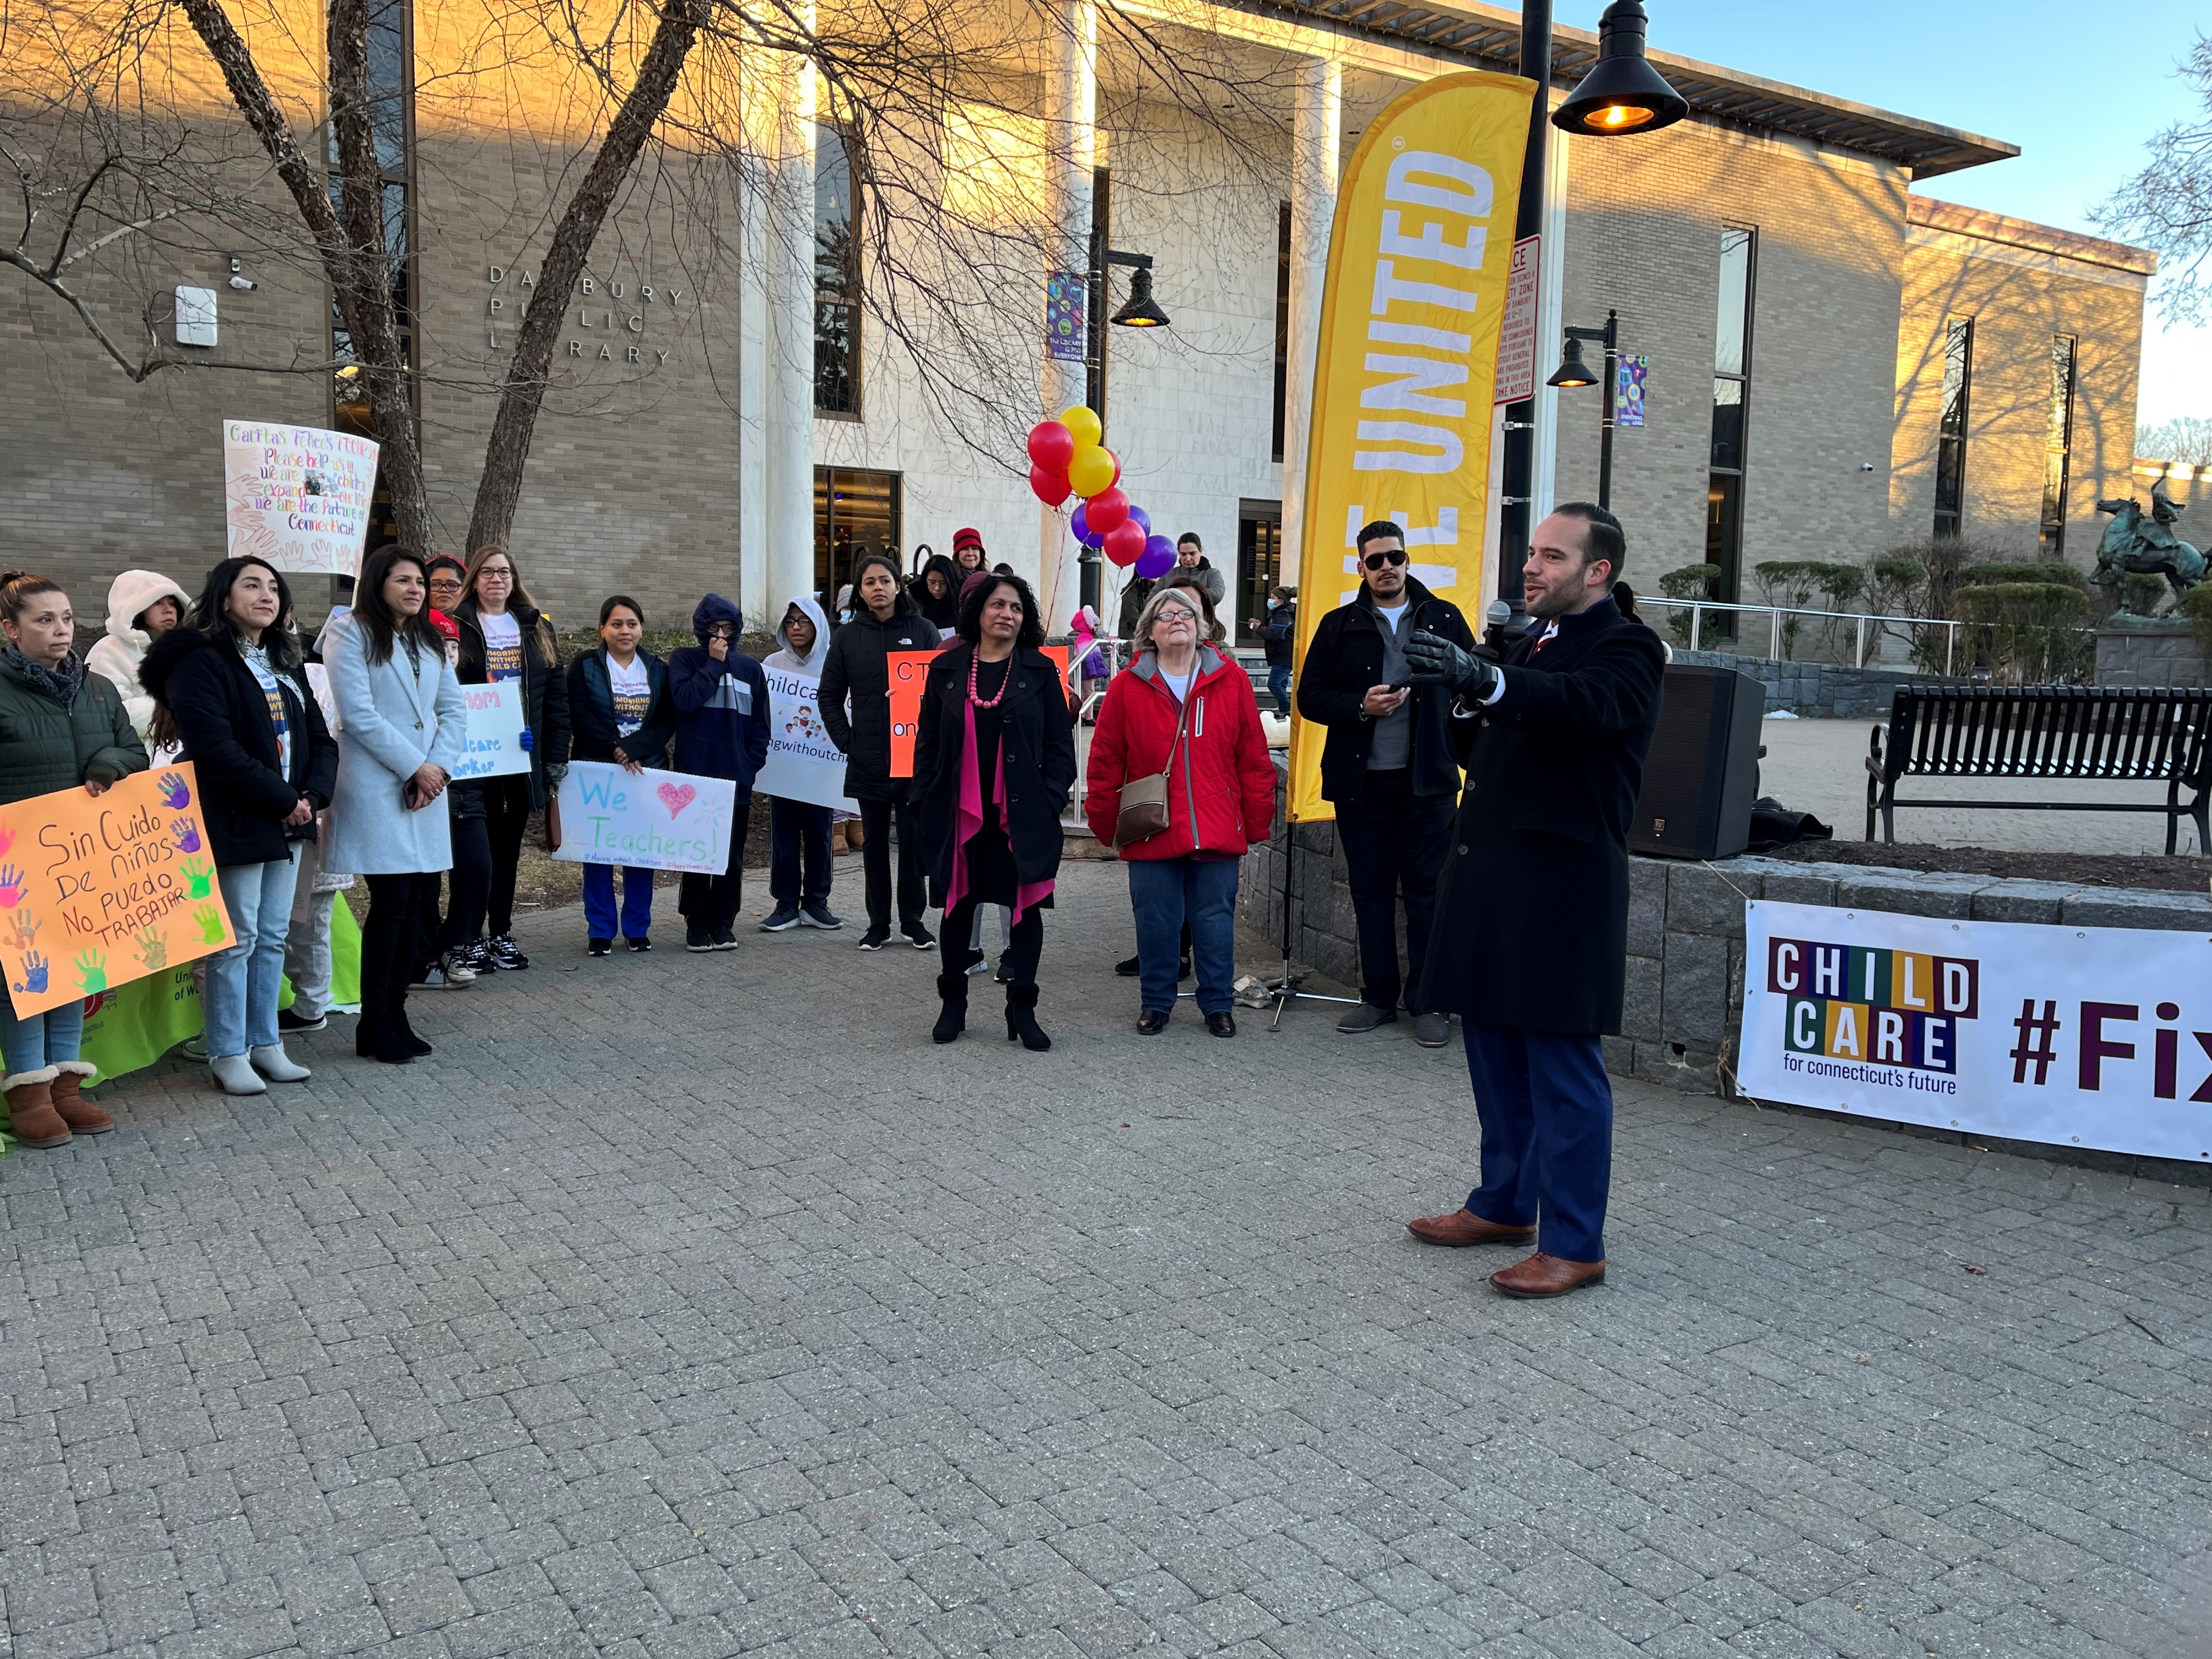 #MorningWithoutChildCare Rally in Danbury 